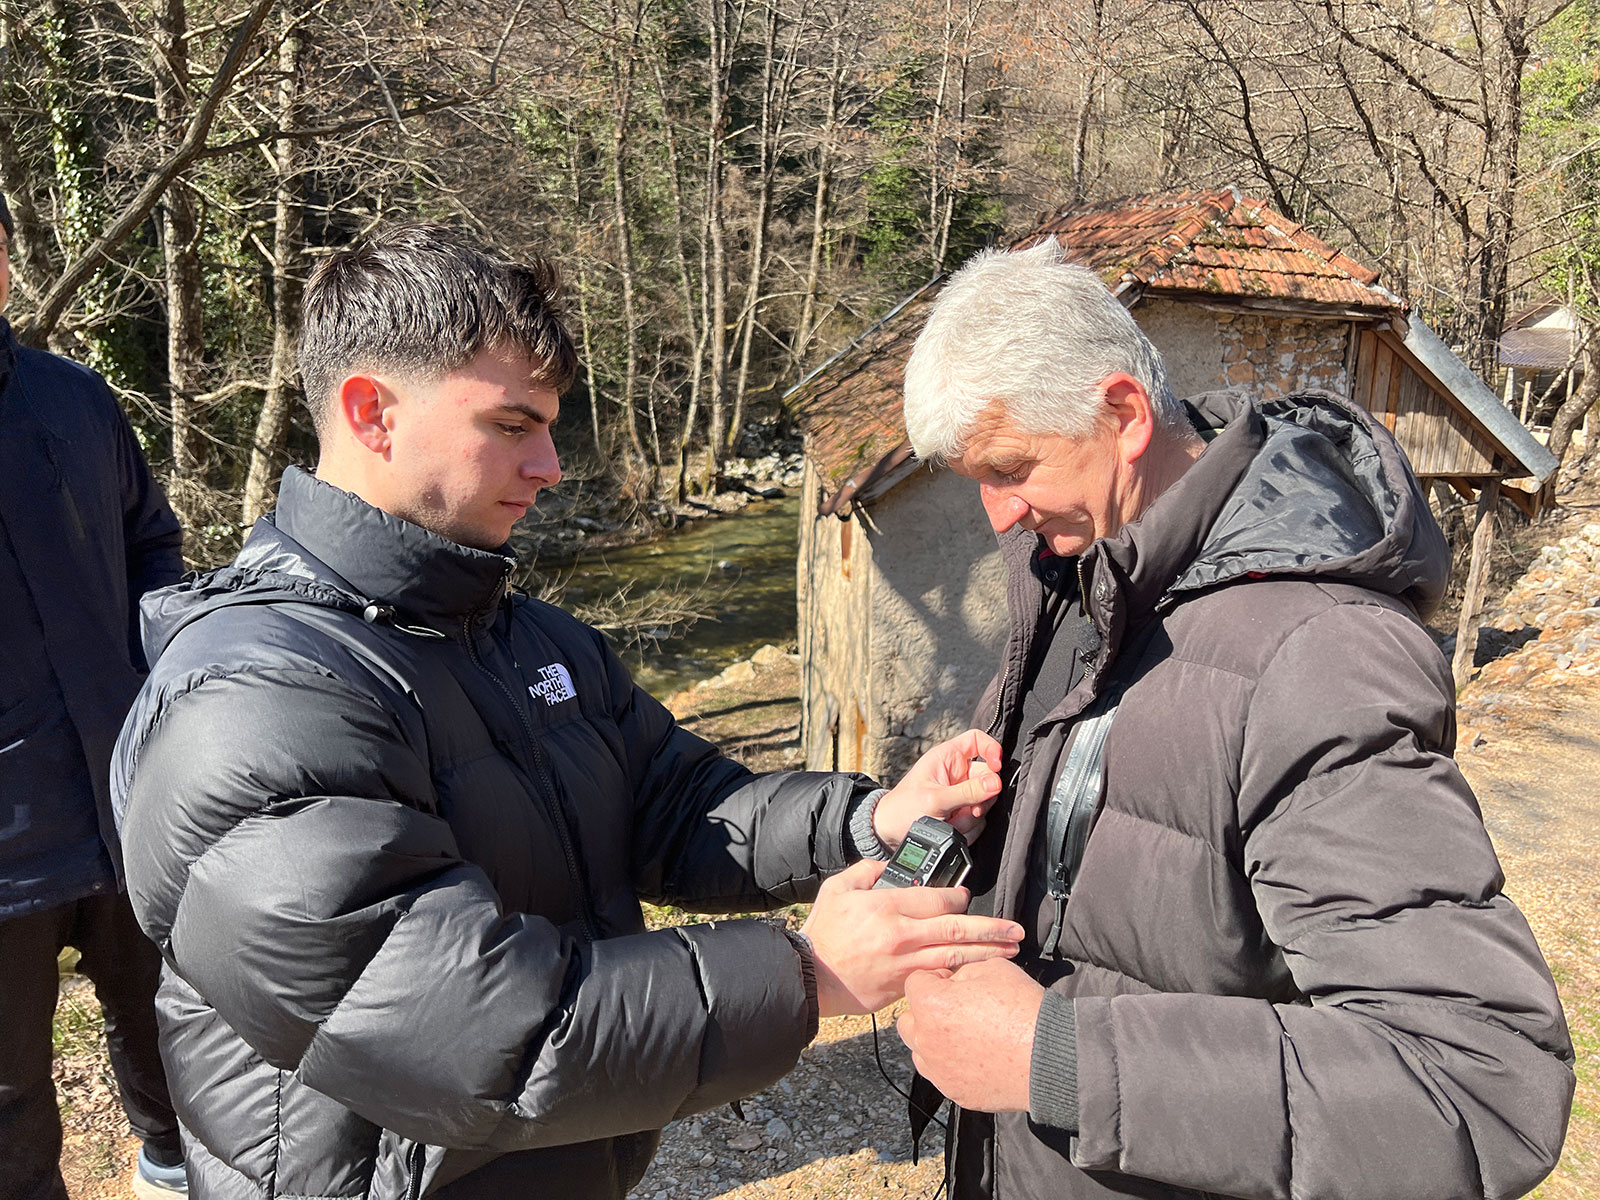 Giorgio Ghiotto mics up interview subject on the banks of the Nerevitca river